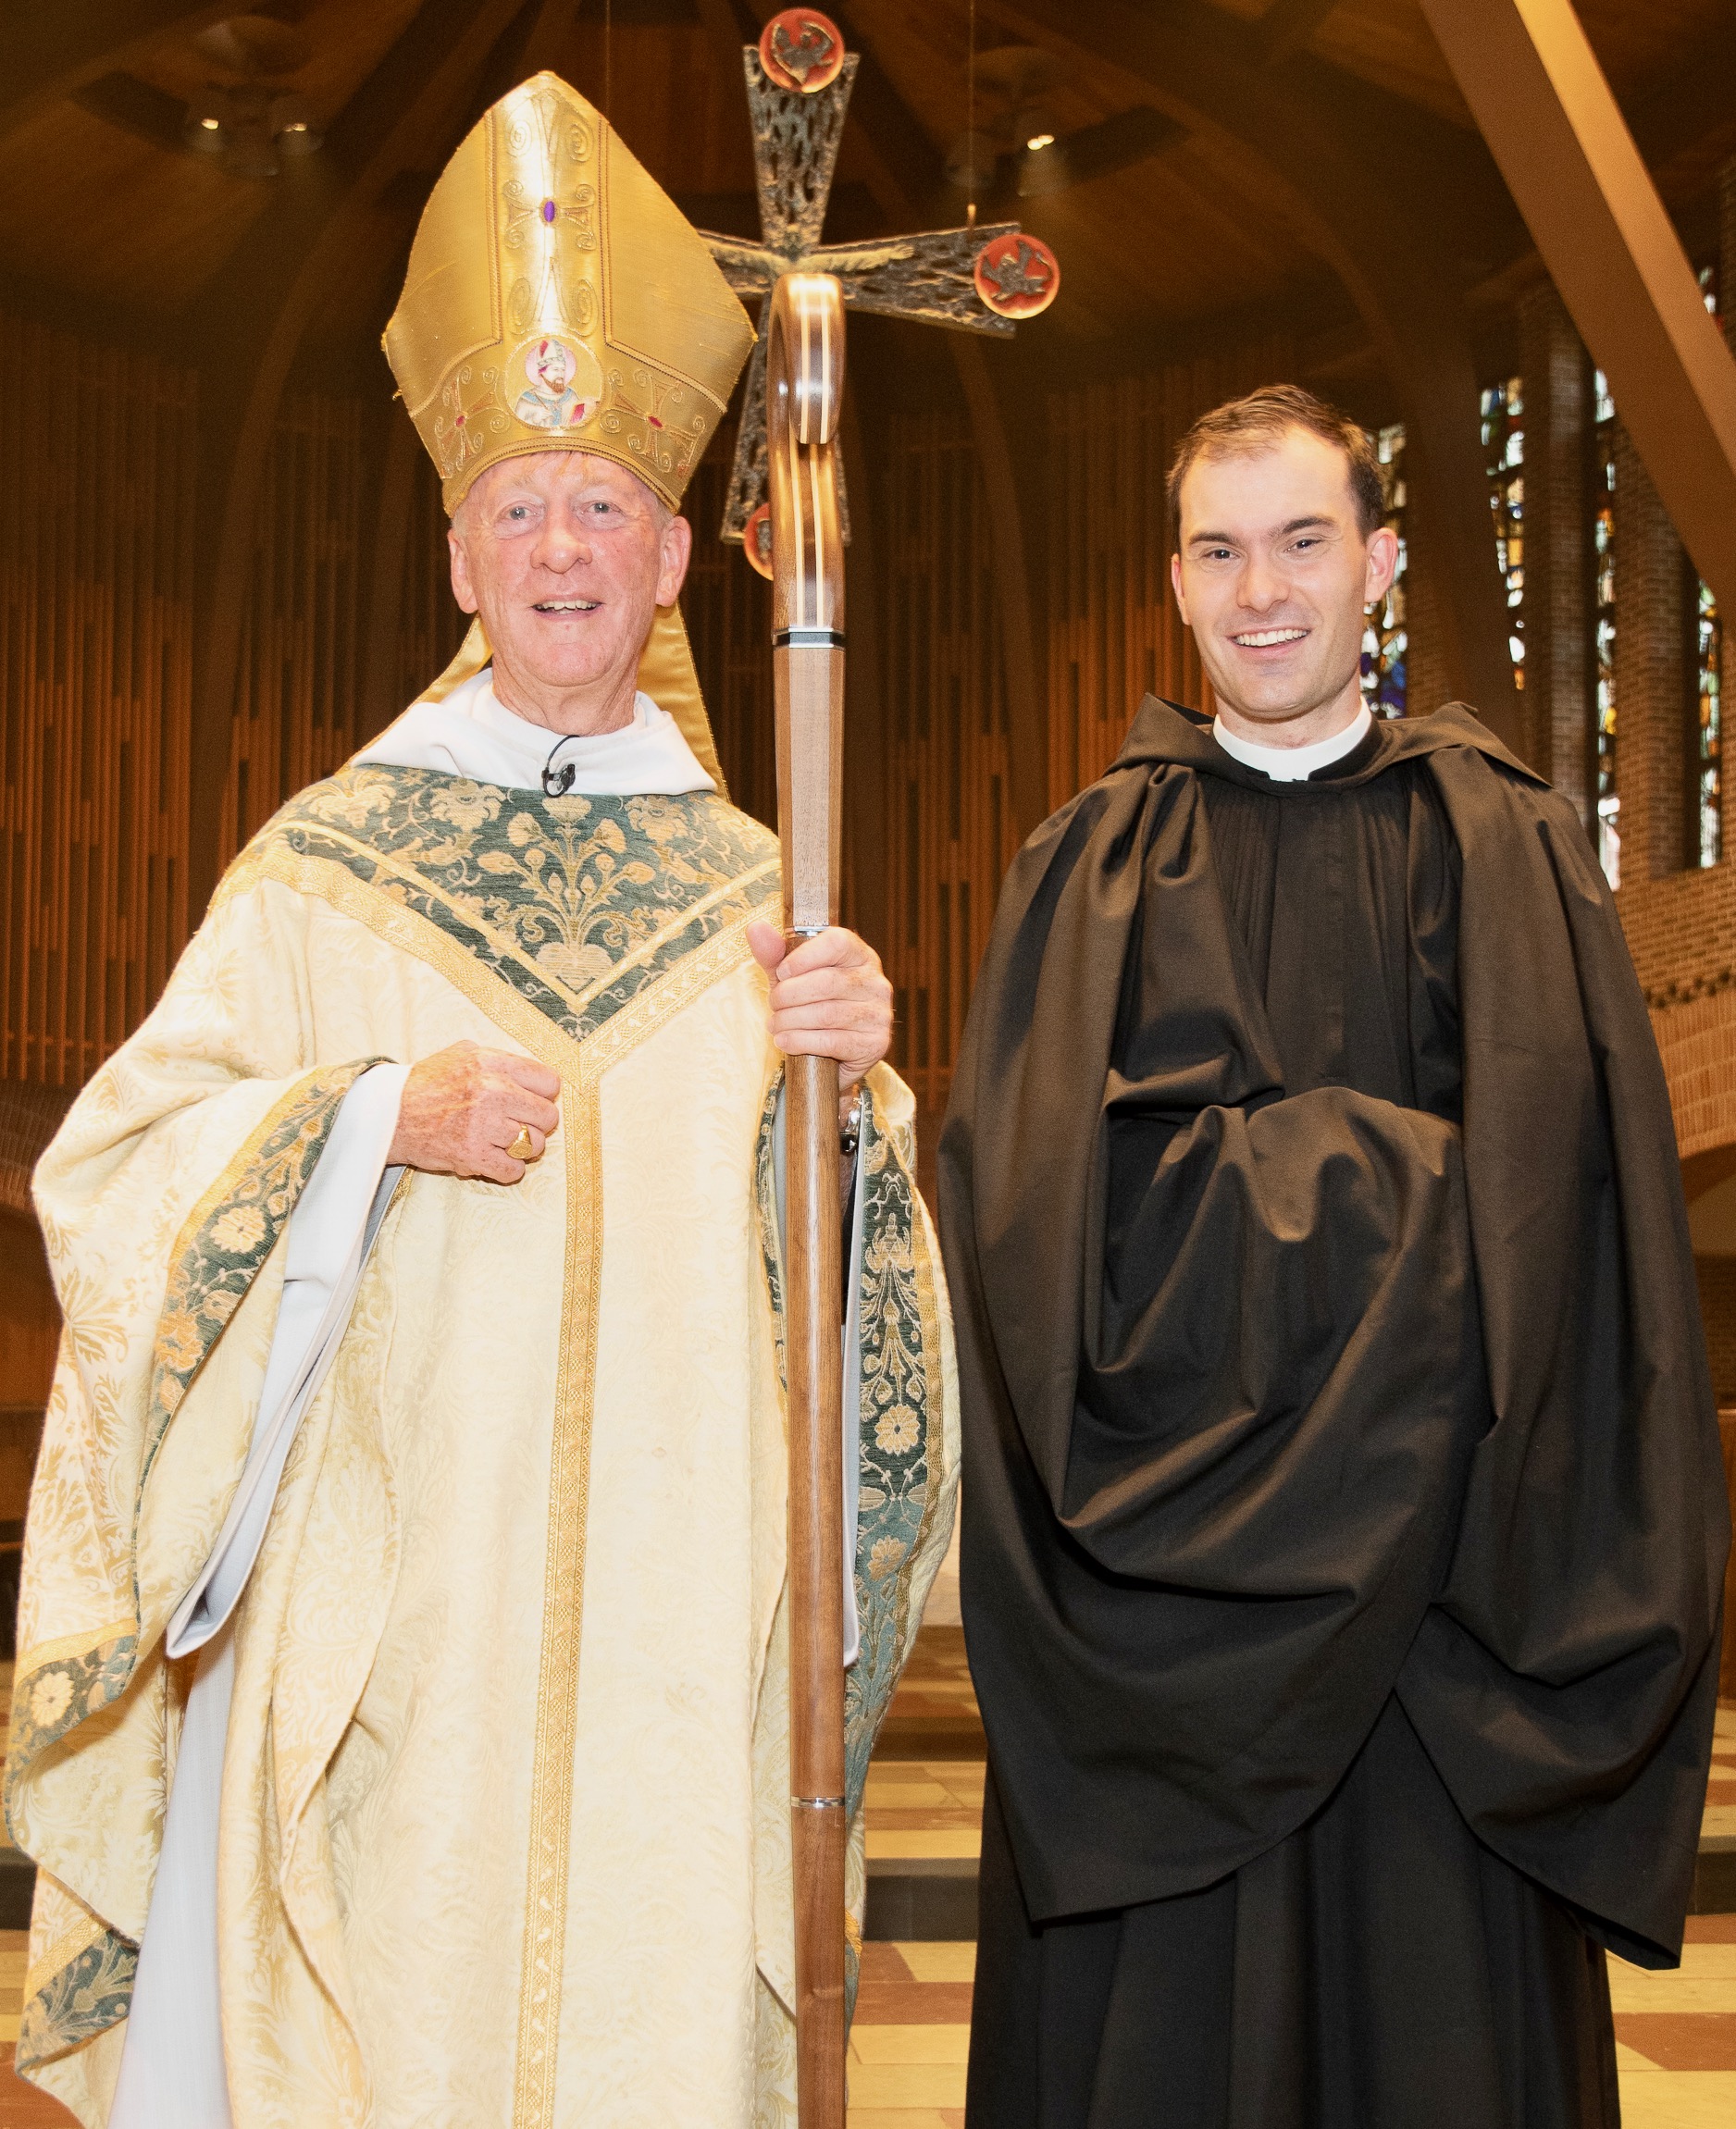 Abbot Mark and Brother Basil